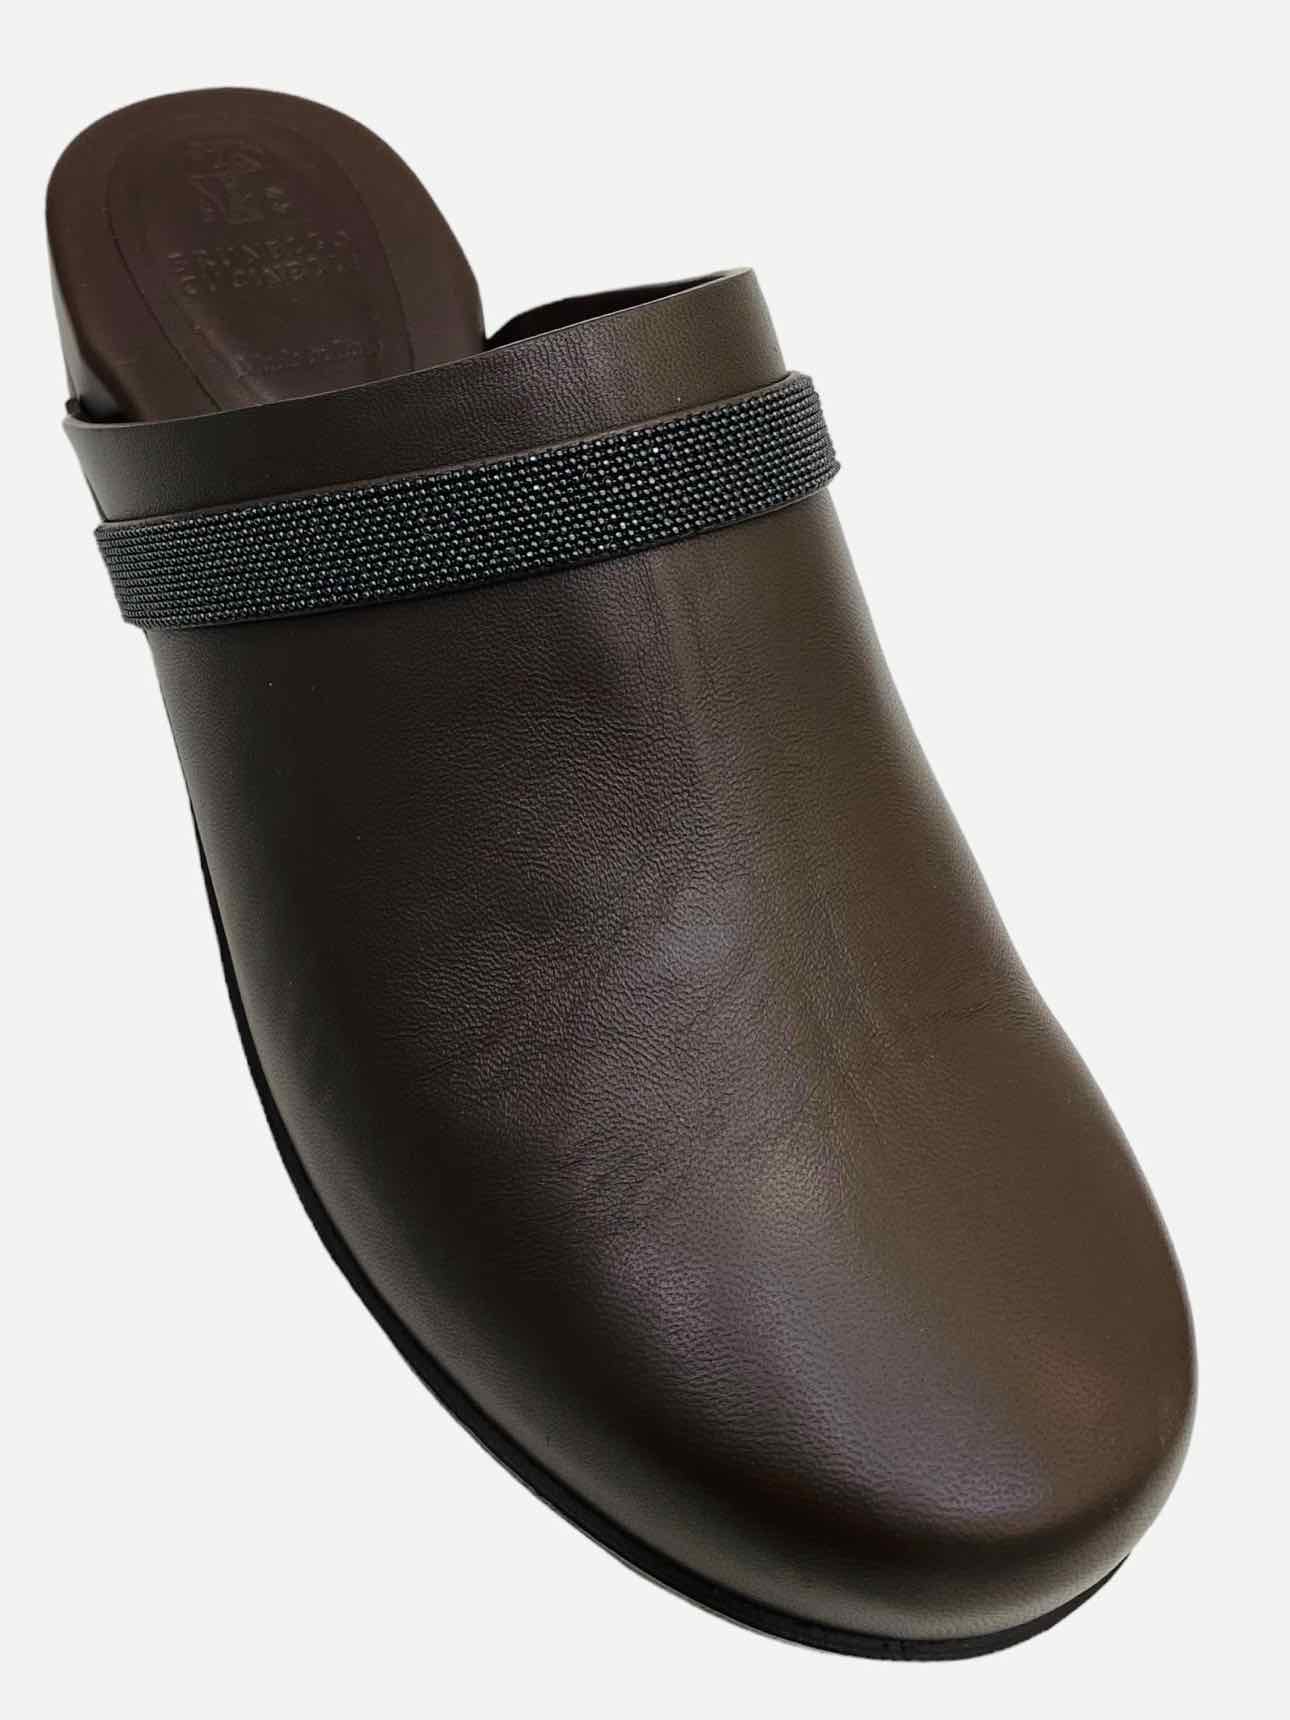 Pre-loved BRUNELLO CUCINELLI Monili Brown Clogs from Reems Closet